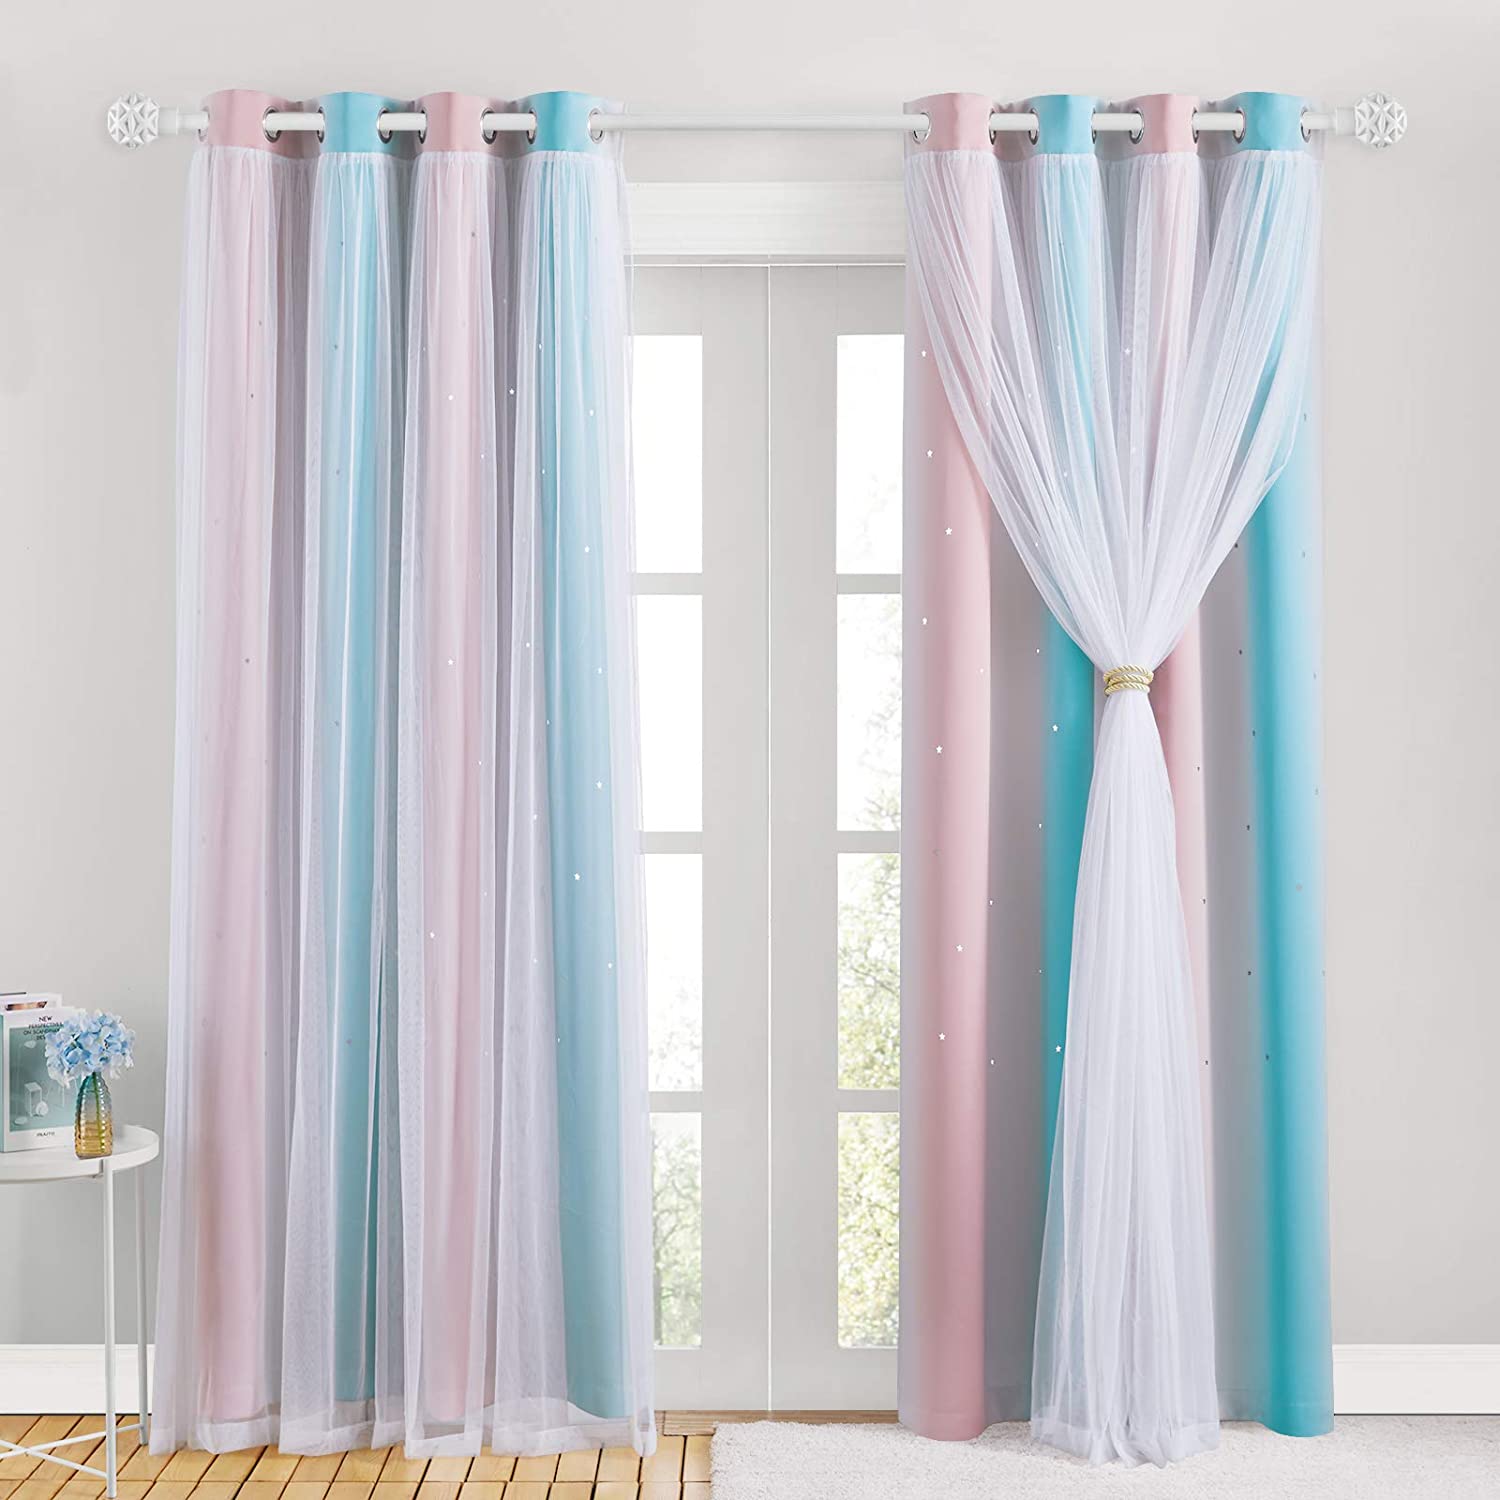 Star Cut Out Blackout Curtains With Sheer Curtain Overlay 2 Panels KGORGE Store